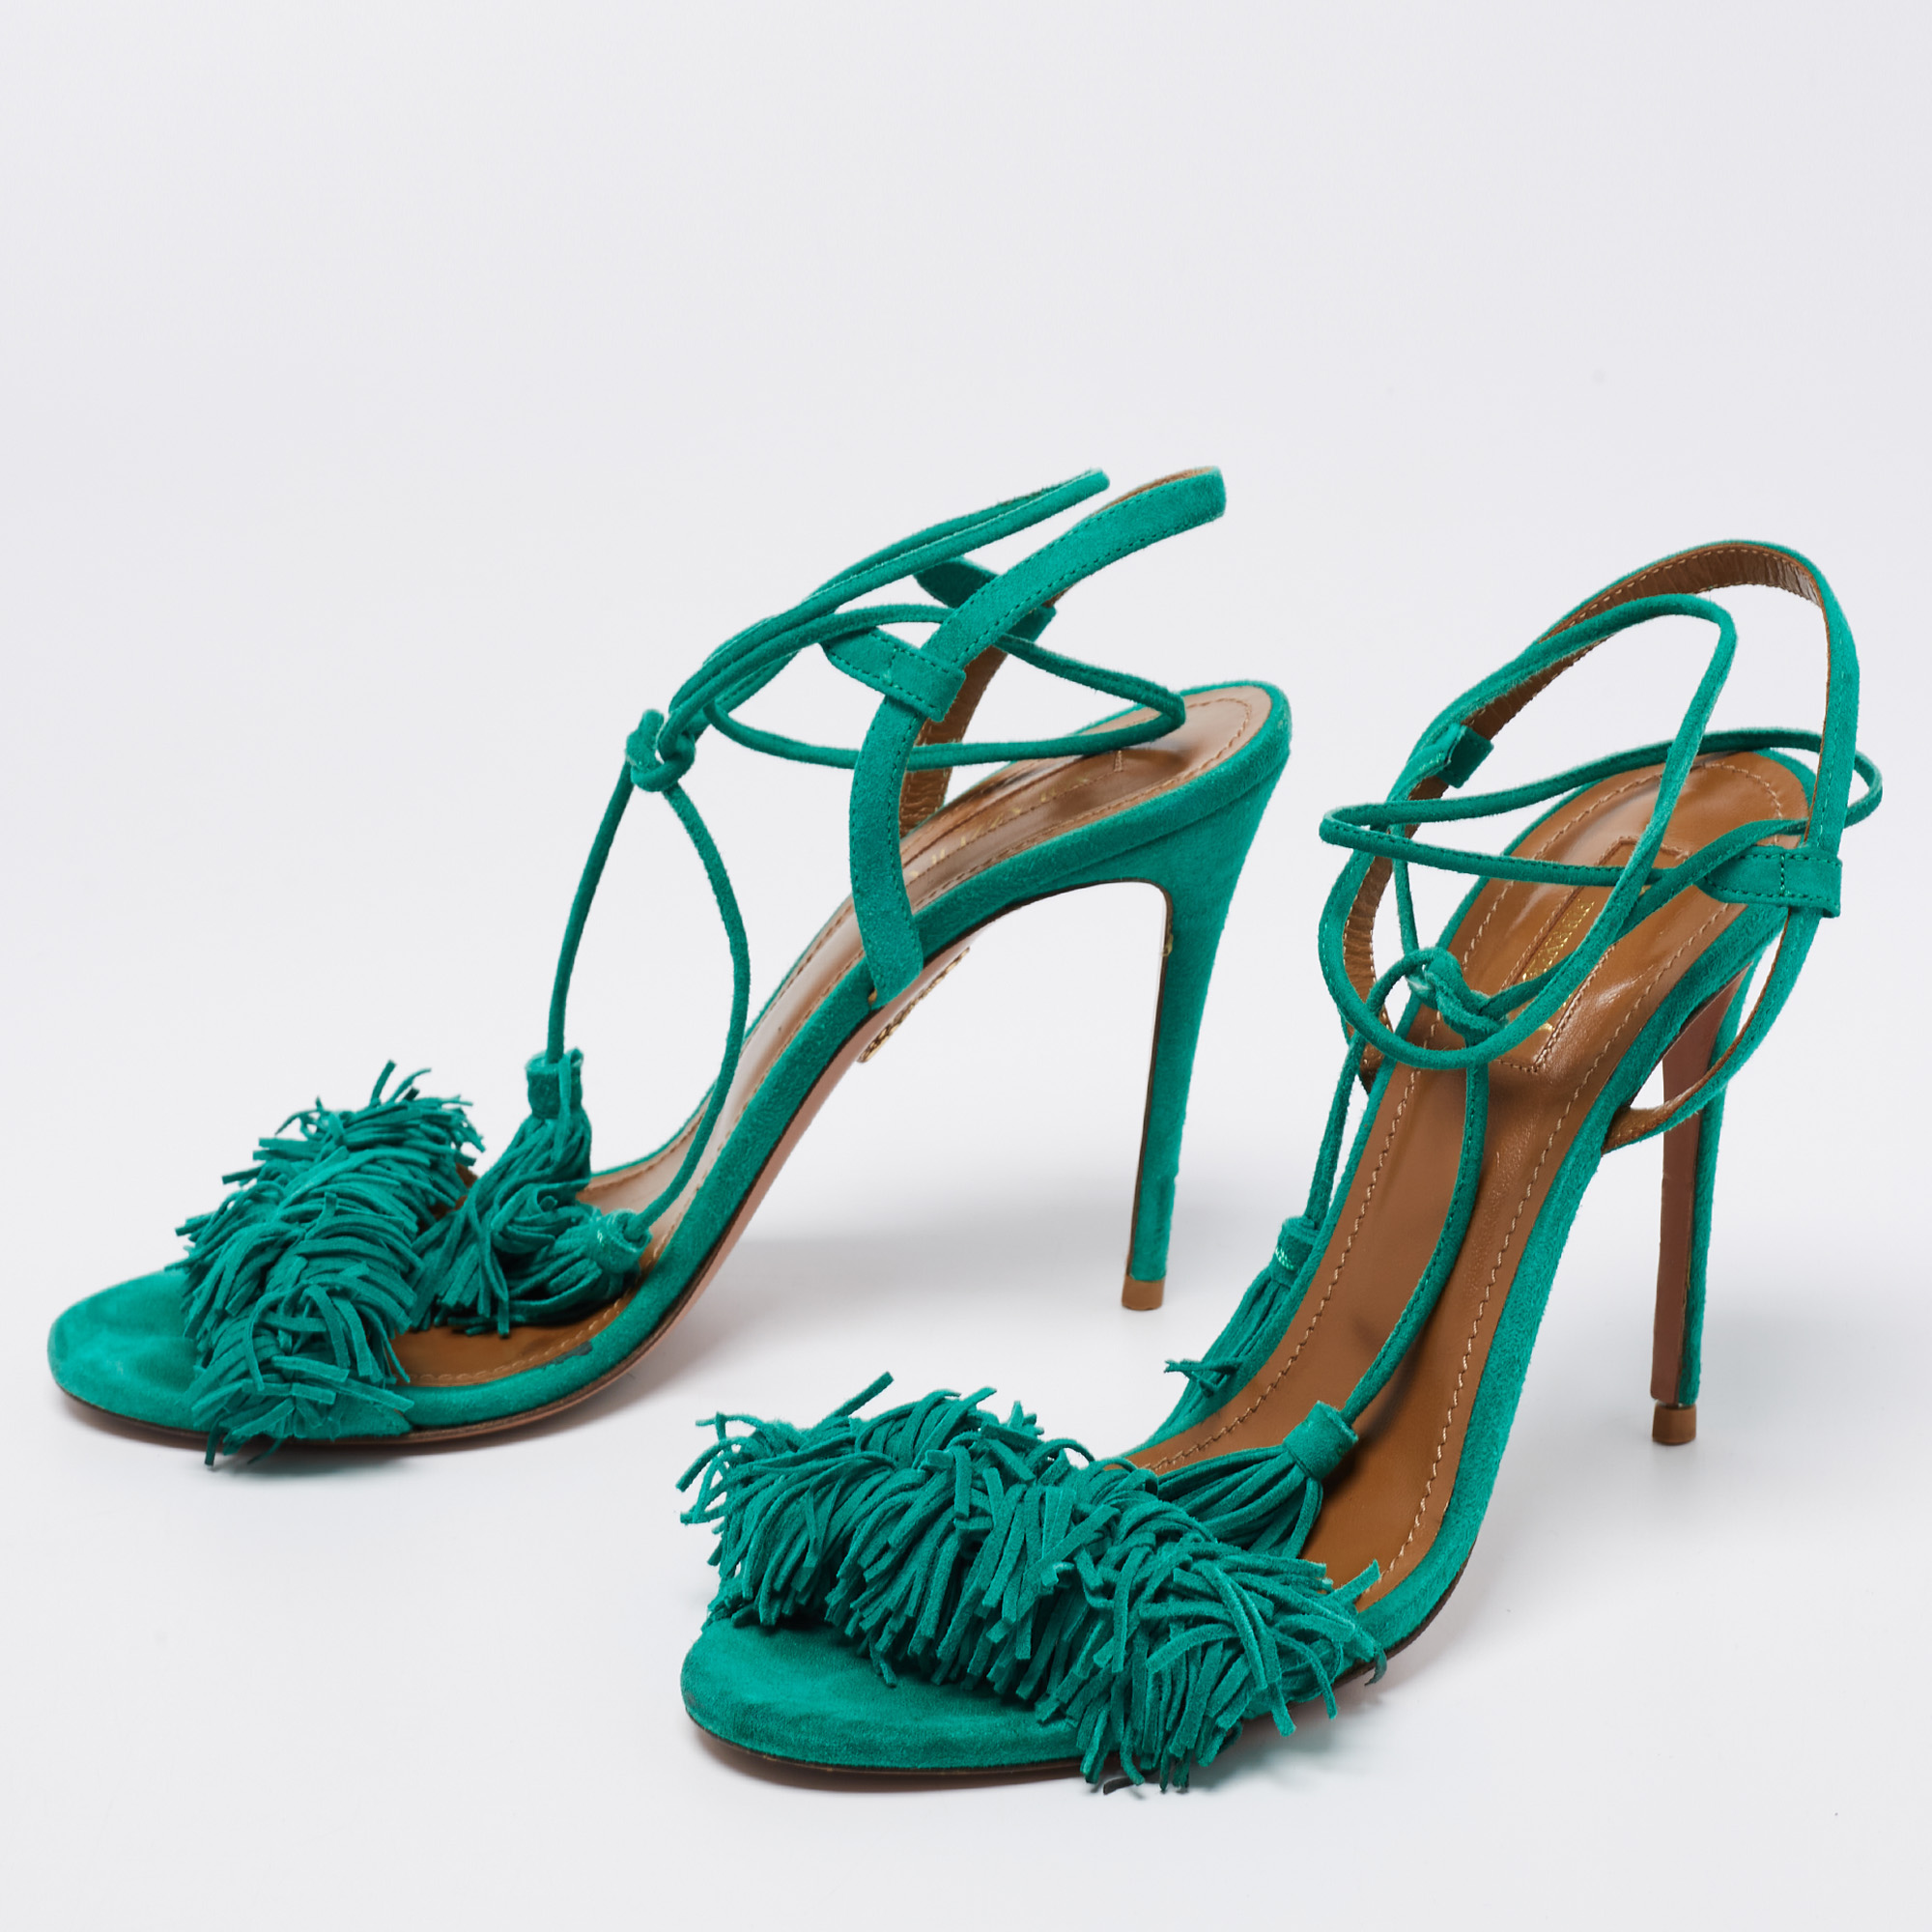 

Aquazzura Teal Green Fringed Suede Wild Thing Tasseled Ankle Wrap Sandals Size